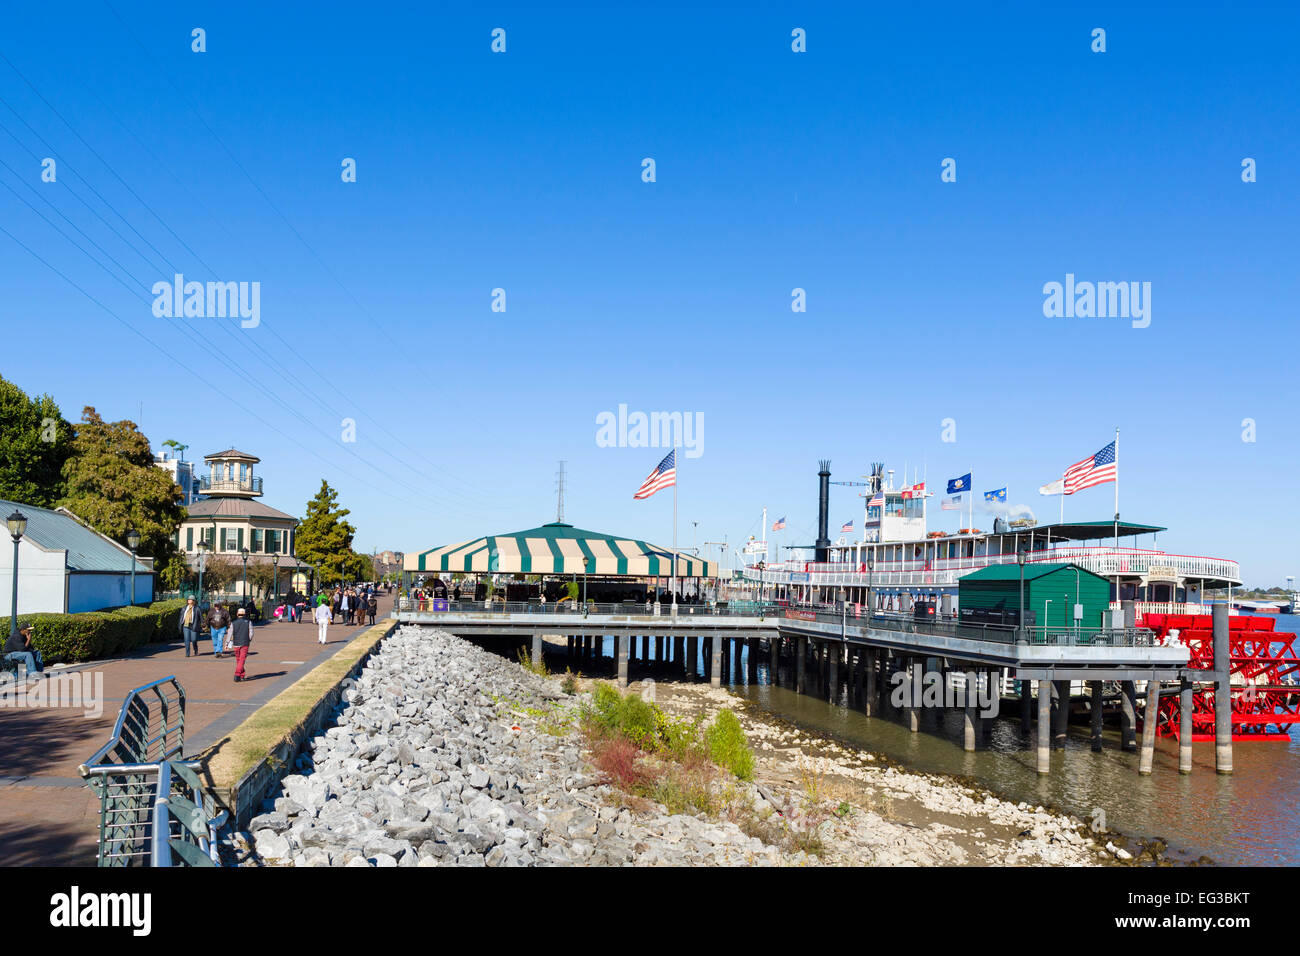 Waterfront promenade and the steamboat Natchez on the Mississippi River, French Quarter, New Orleans, Louisiana, USA Stock Photo